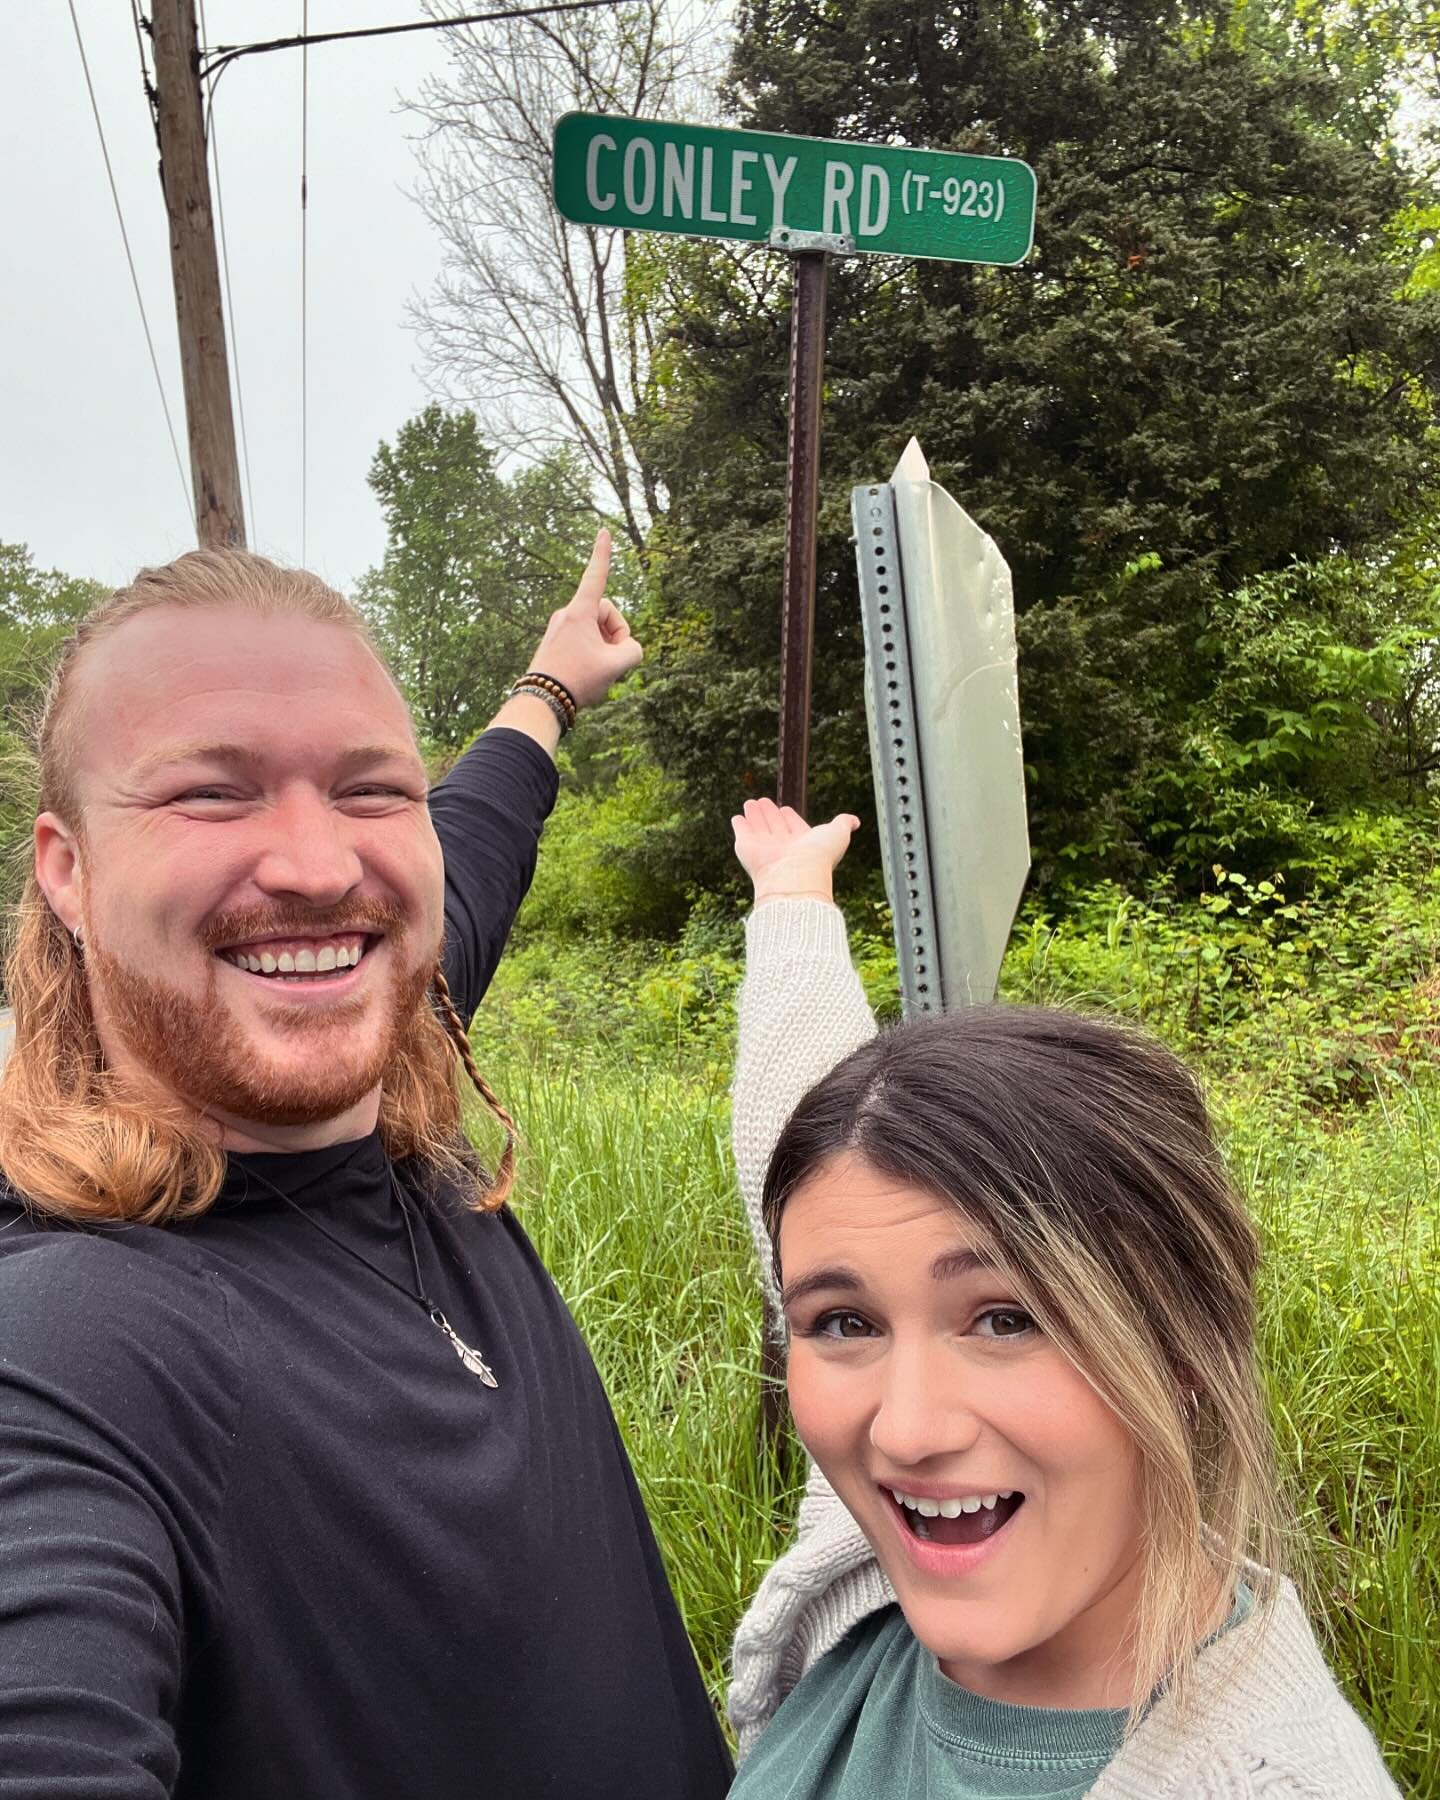 Country roads, take me home, to a place&hellip; WHERE I BELONGGGGGG!!!! 

Look what we found in PA!